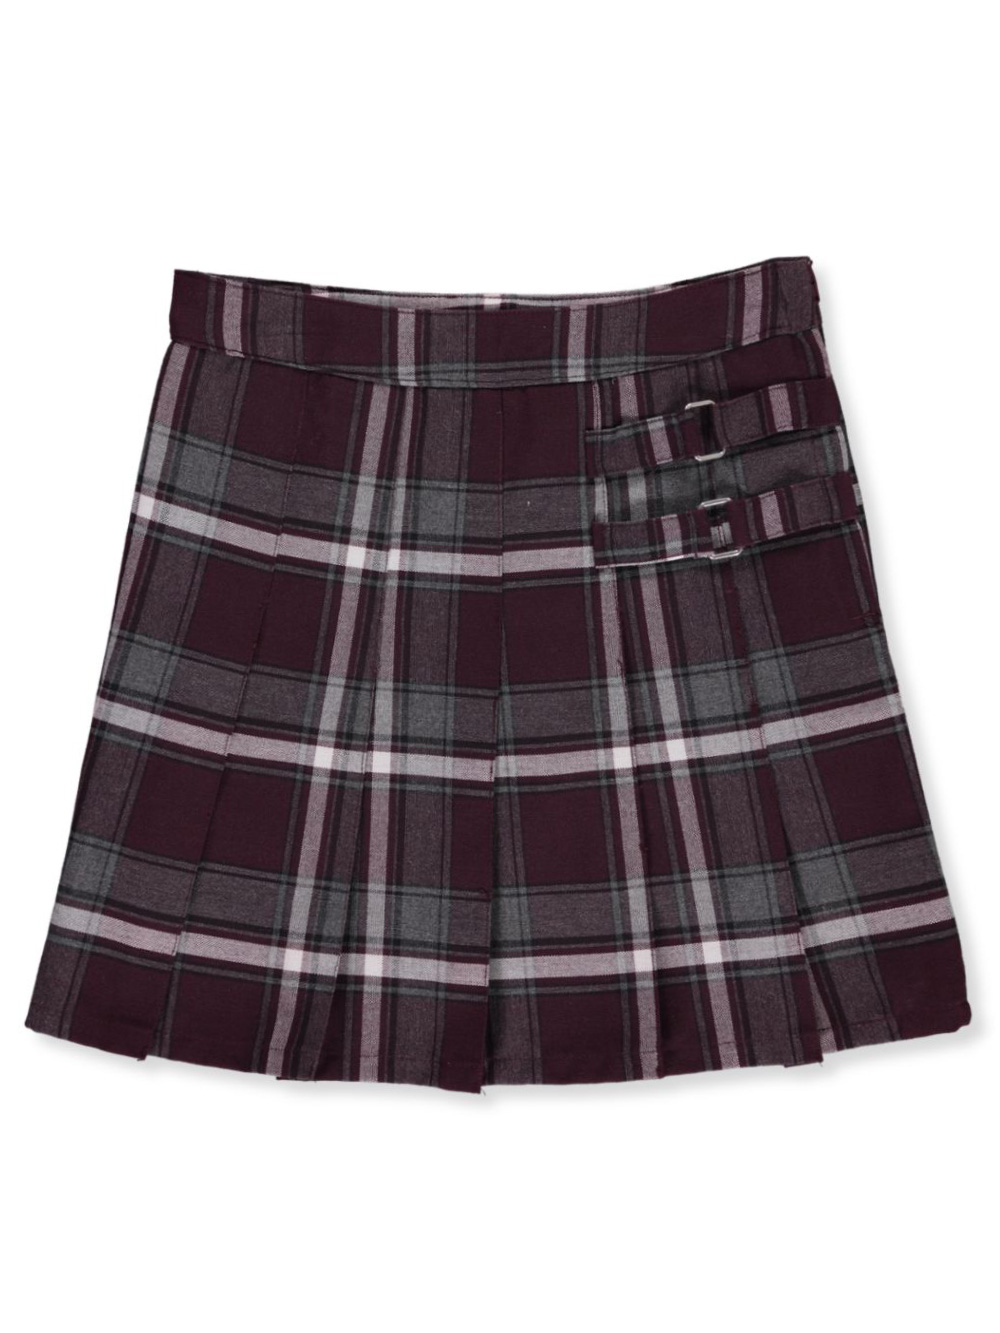 At School by French Toast French Toast Big Girls' "Buckled" Plaid Scooter Skirt (Sizes 7 - 20)